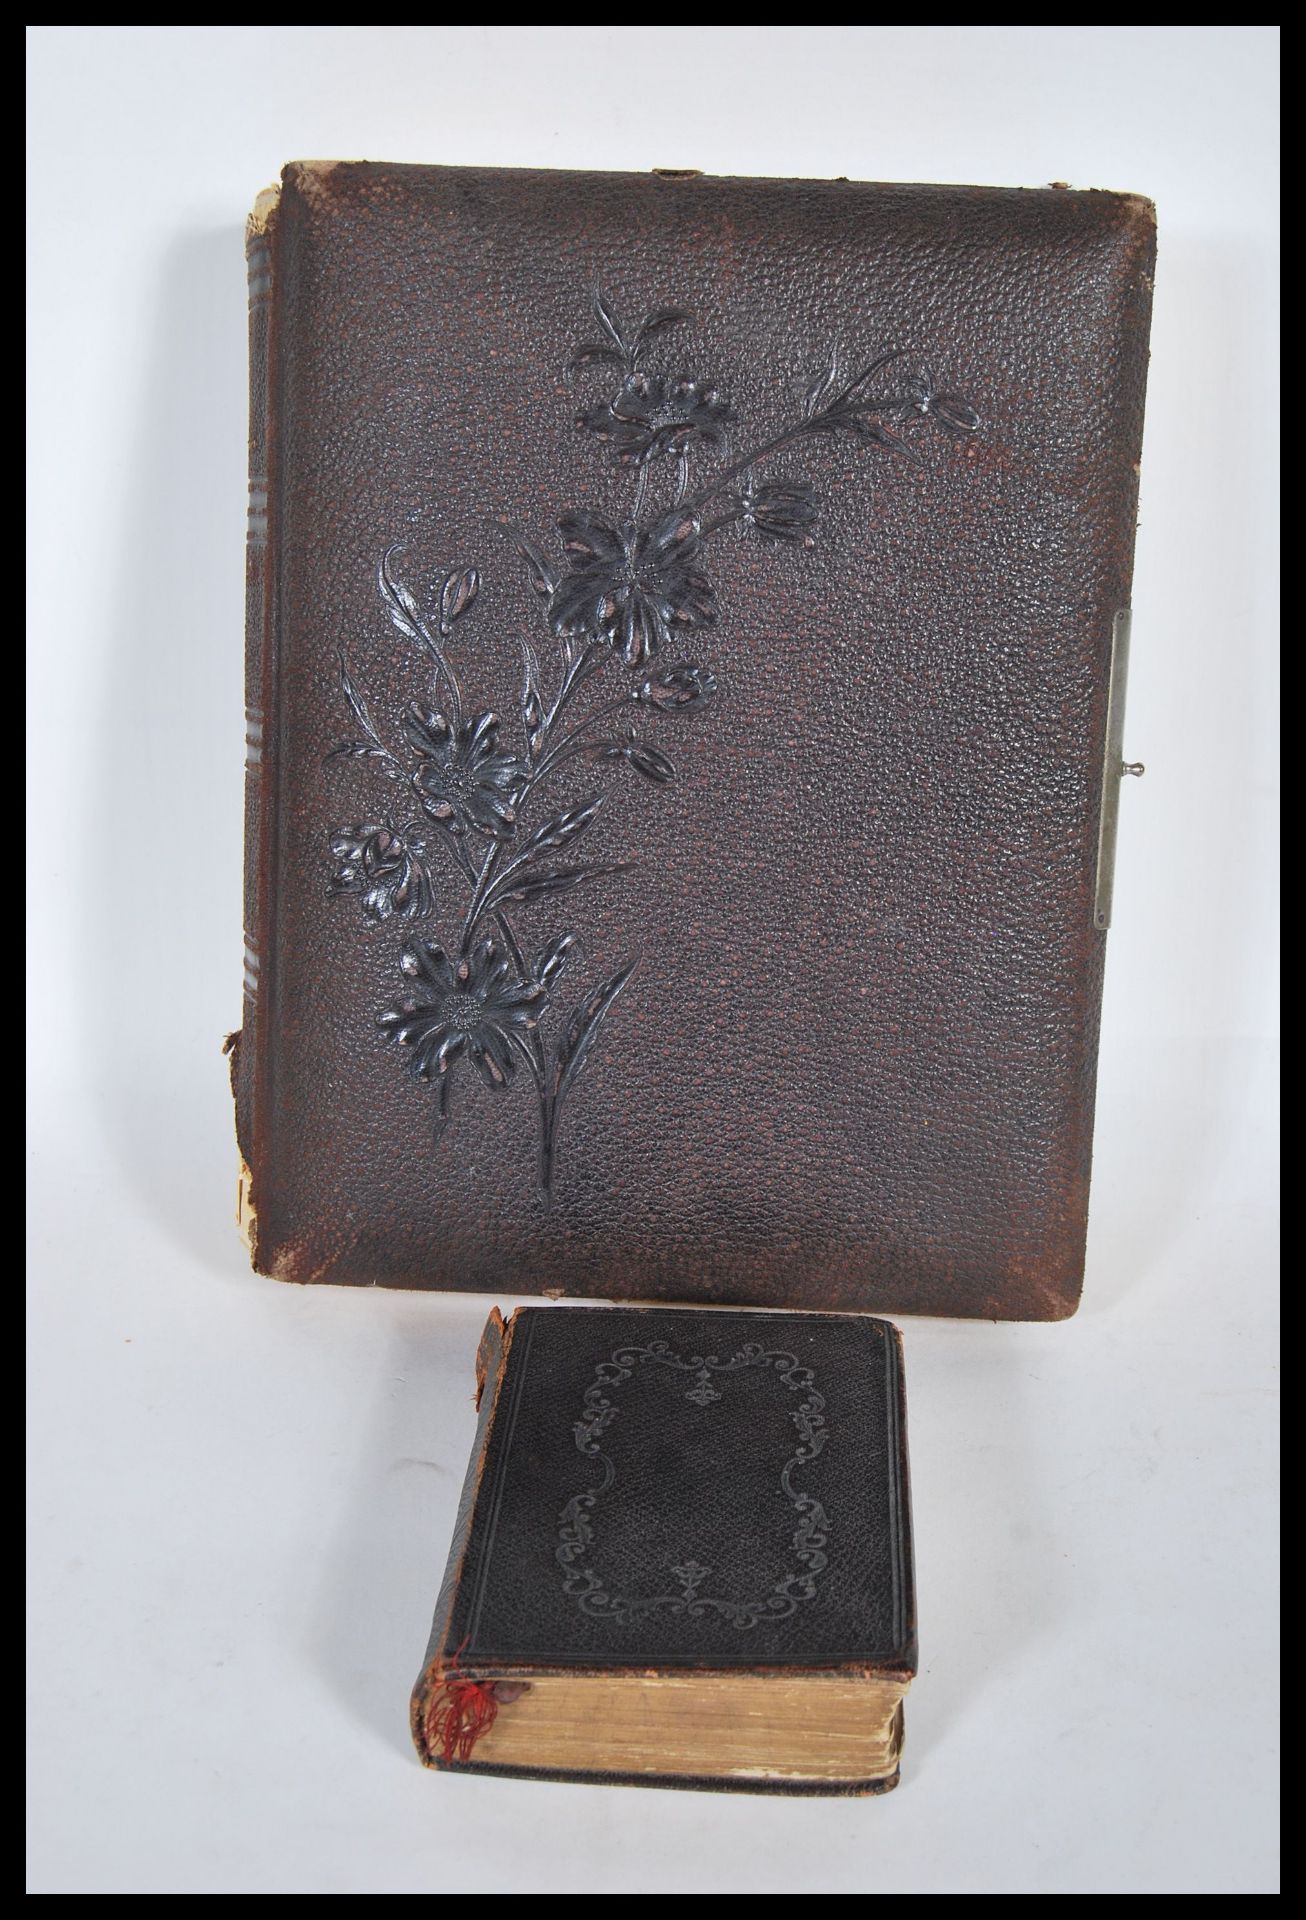 A 19th Century Victorian photograph album bound in brown leather with gilt edging, mostly containing